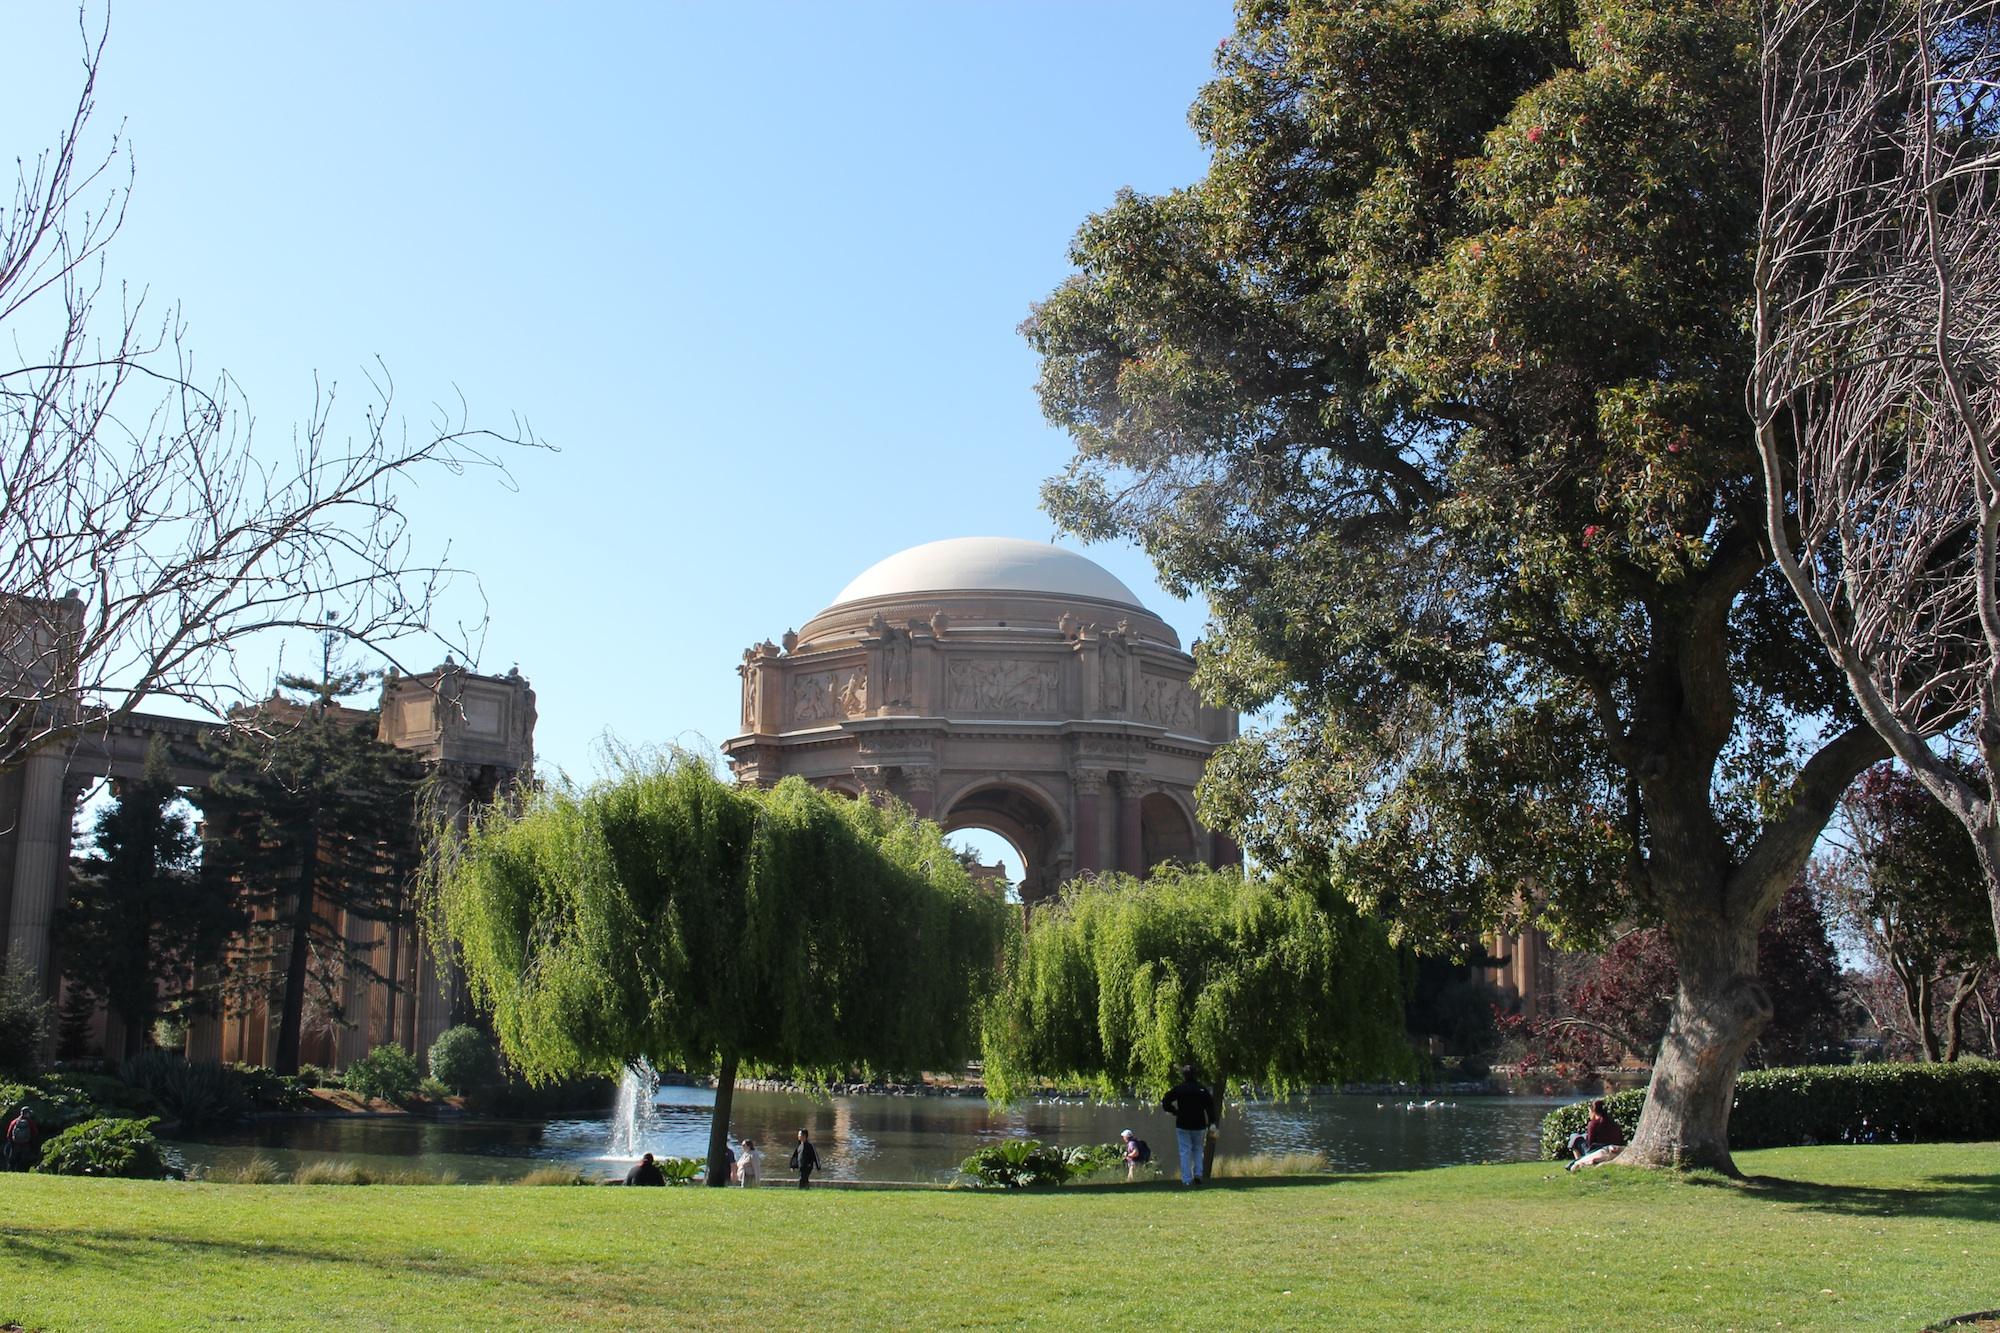 Cover image of this place Palace of Fine Arts